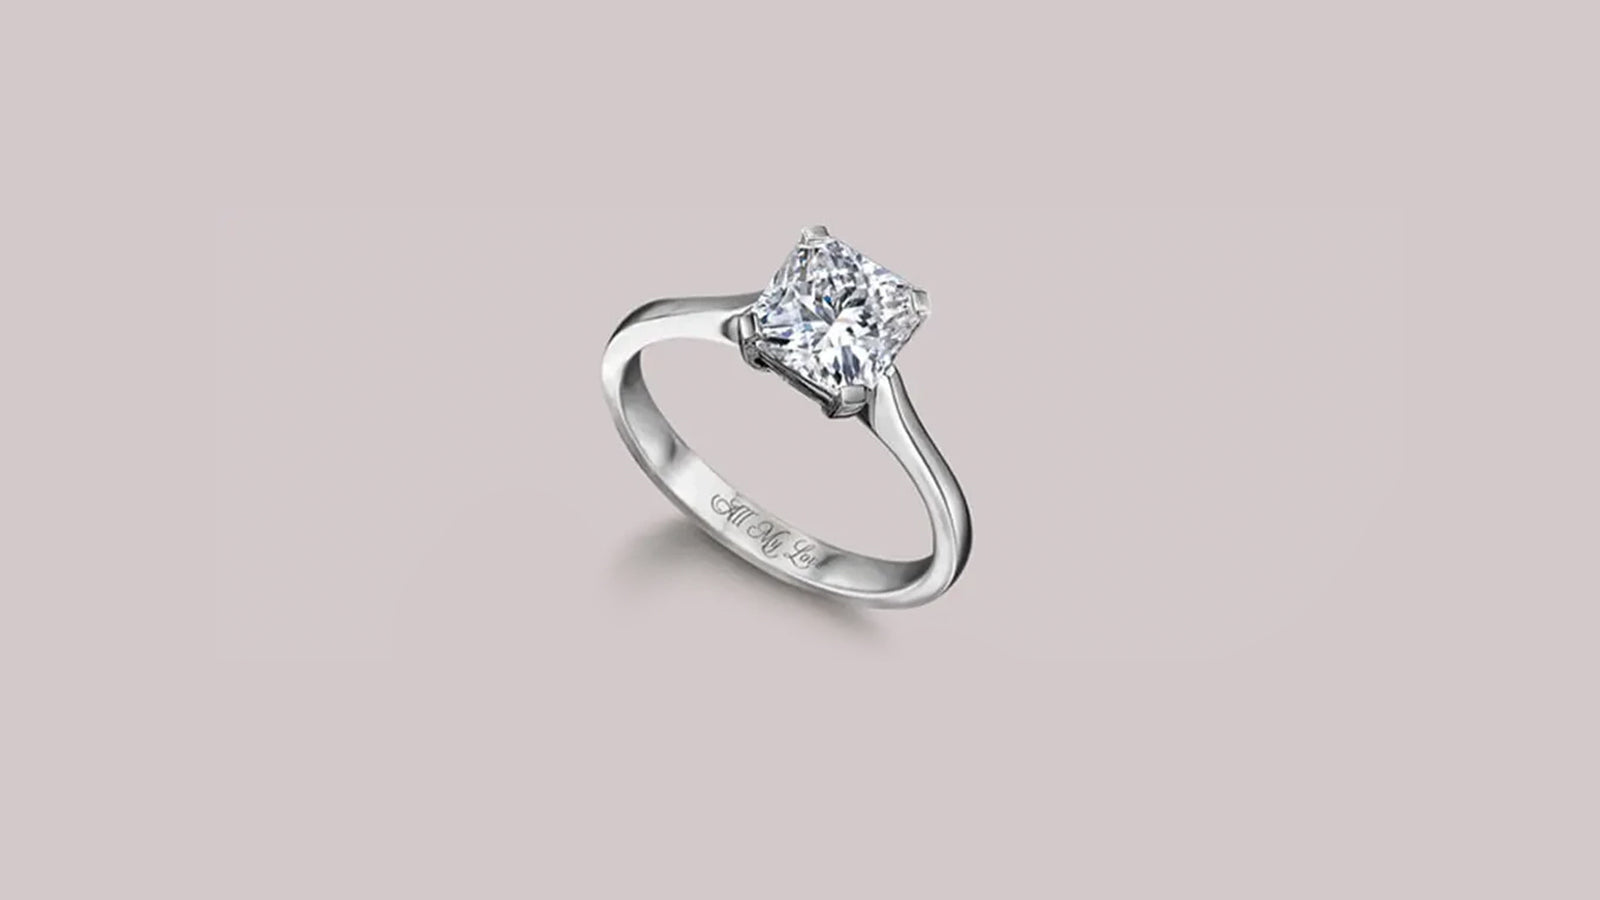 ENGAGEMENT RING SHOPPING TIPS: HOW LONG BEFORE PROPOSING SHOULD YOU BUY THE RING? - SHIMANSKY.CO.ZA